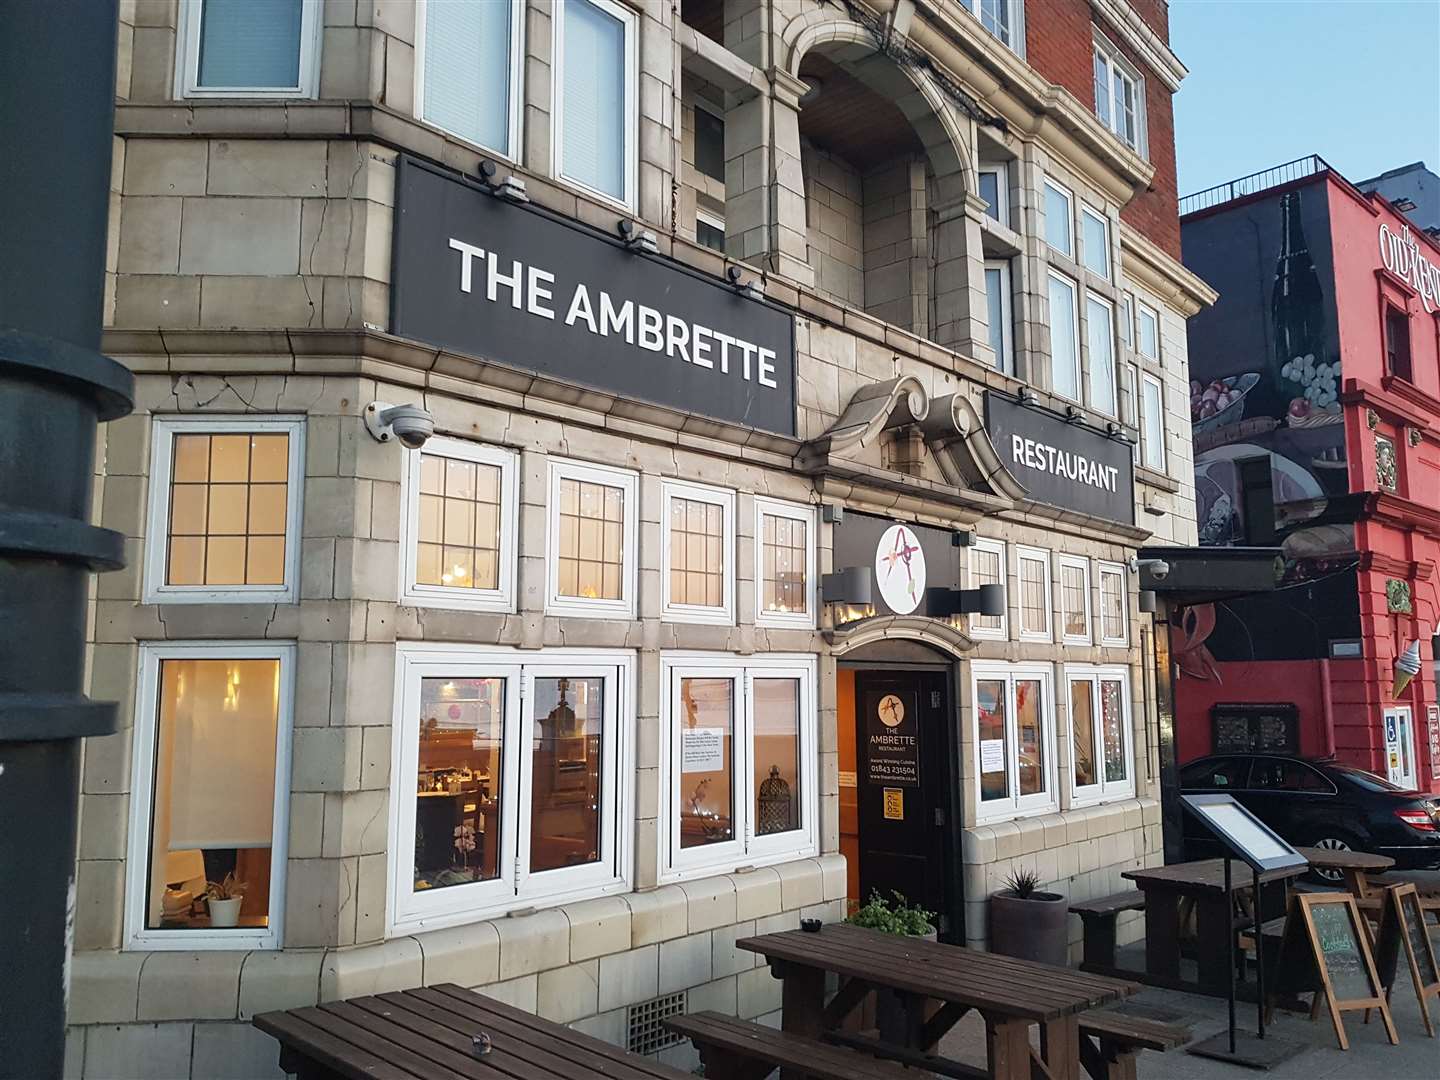 The Ambrette restaurant in Margate closed down earlier this year